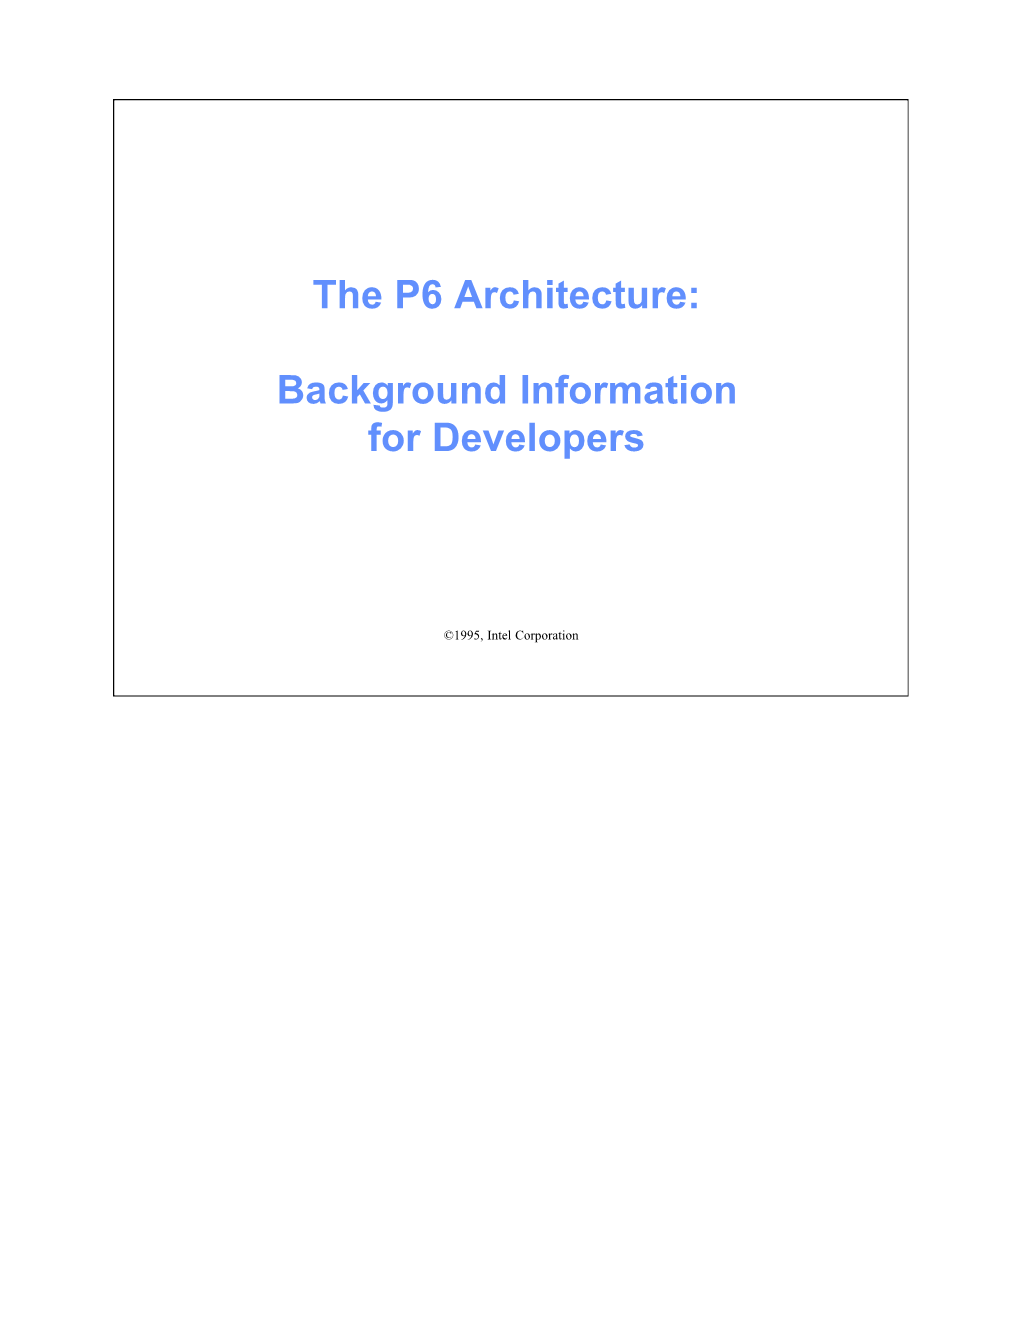 The P6 Architecture: Background Information for Developers